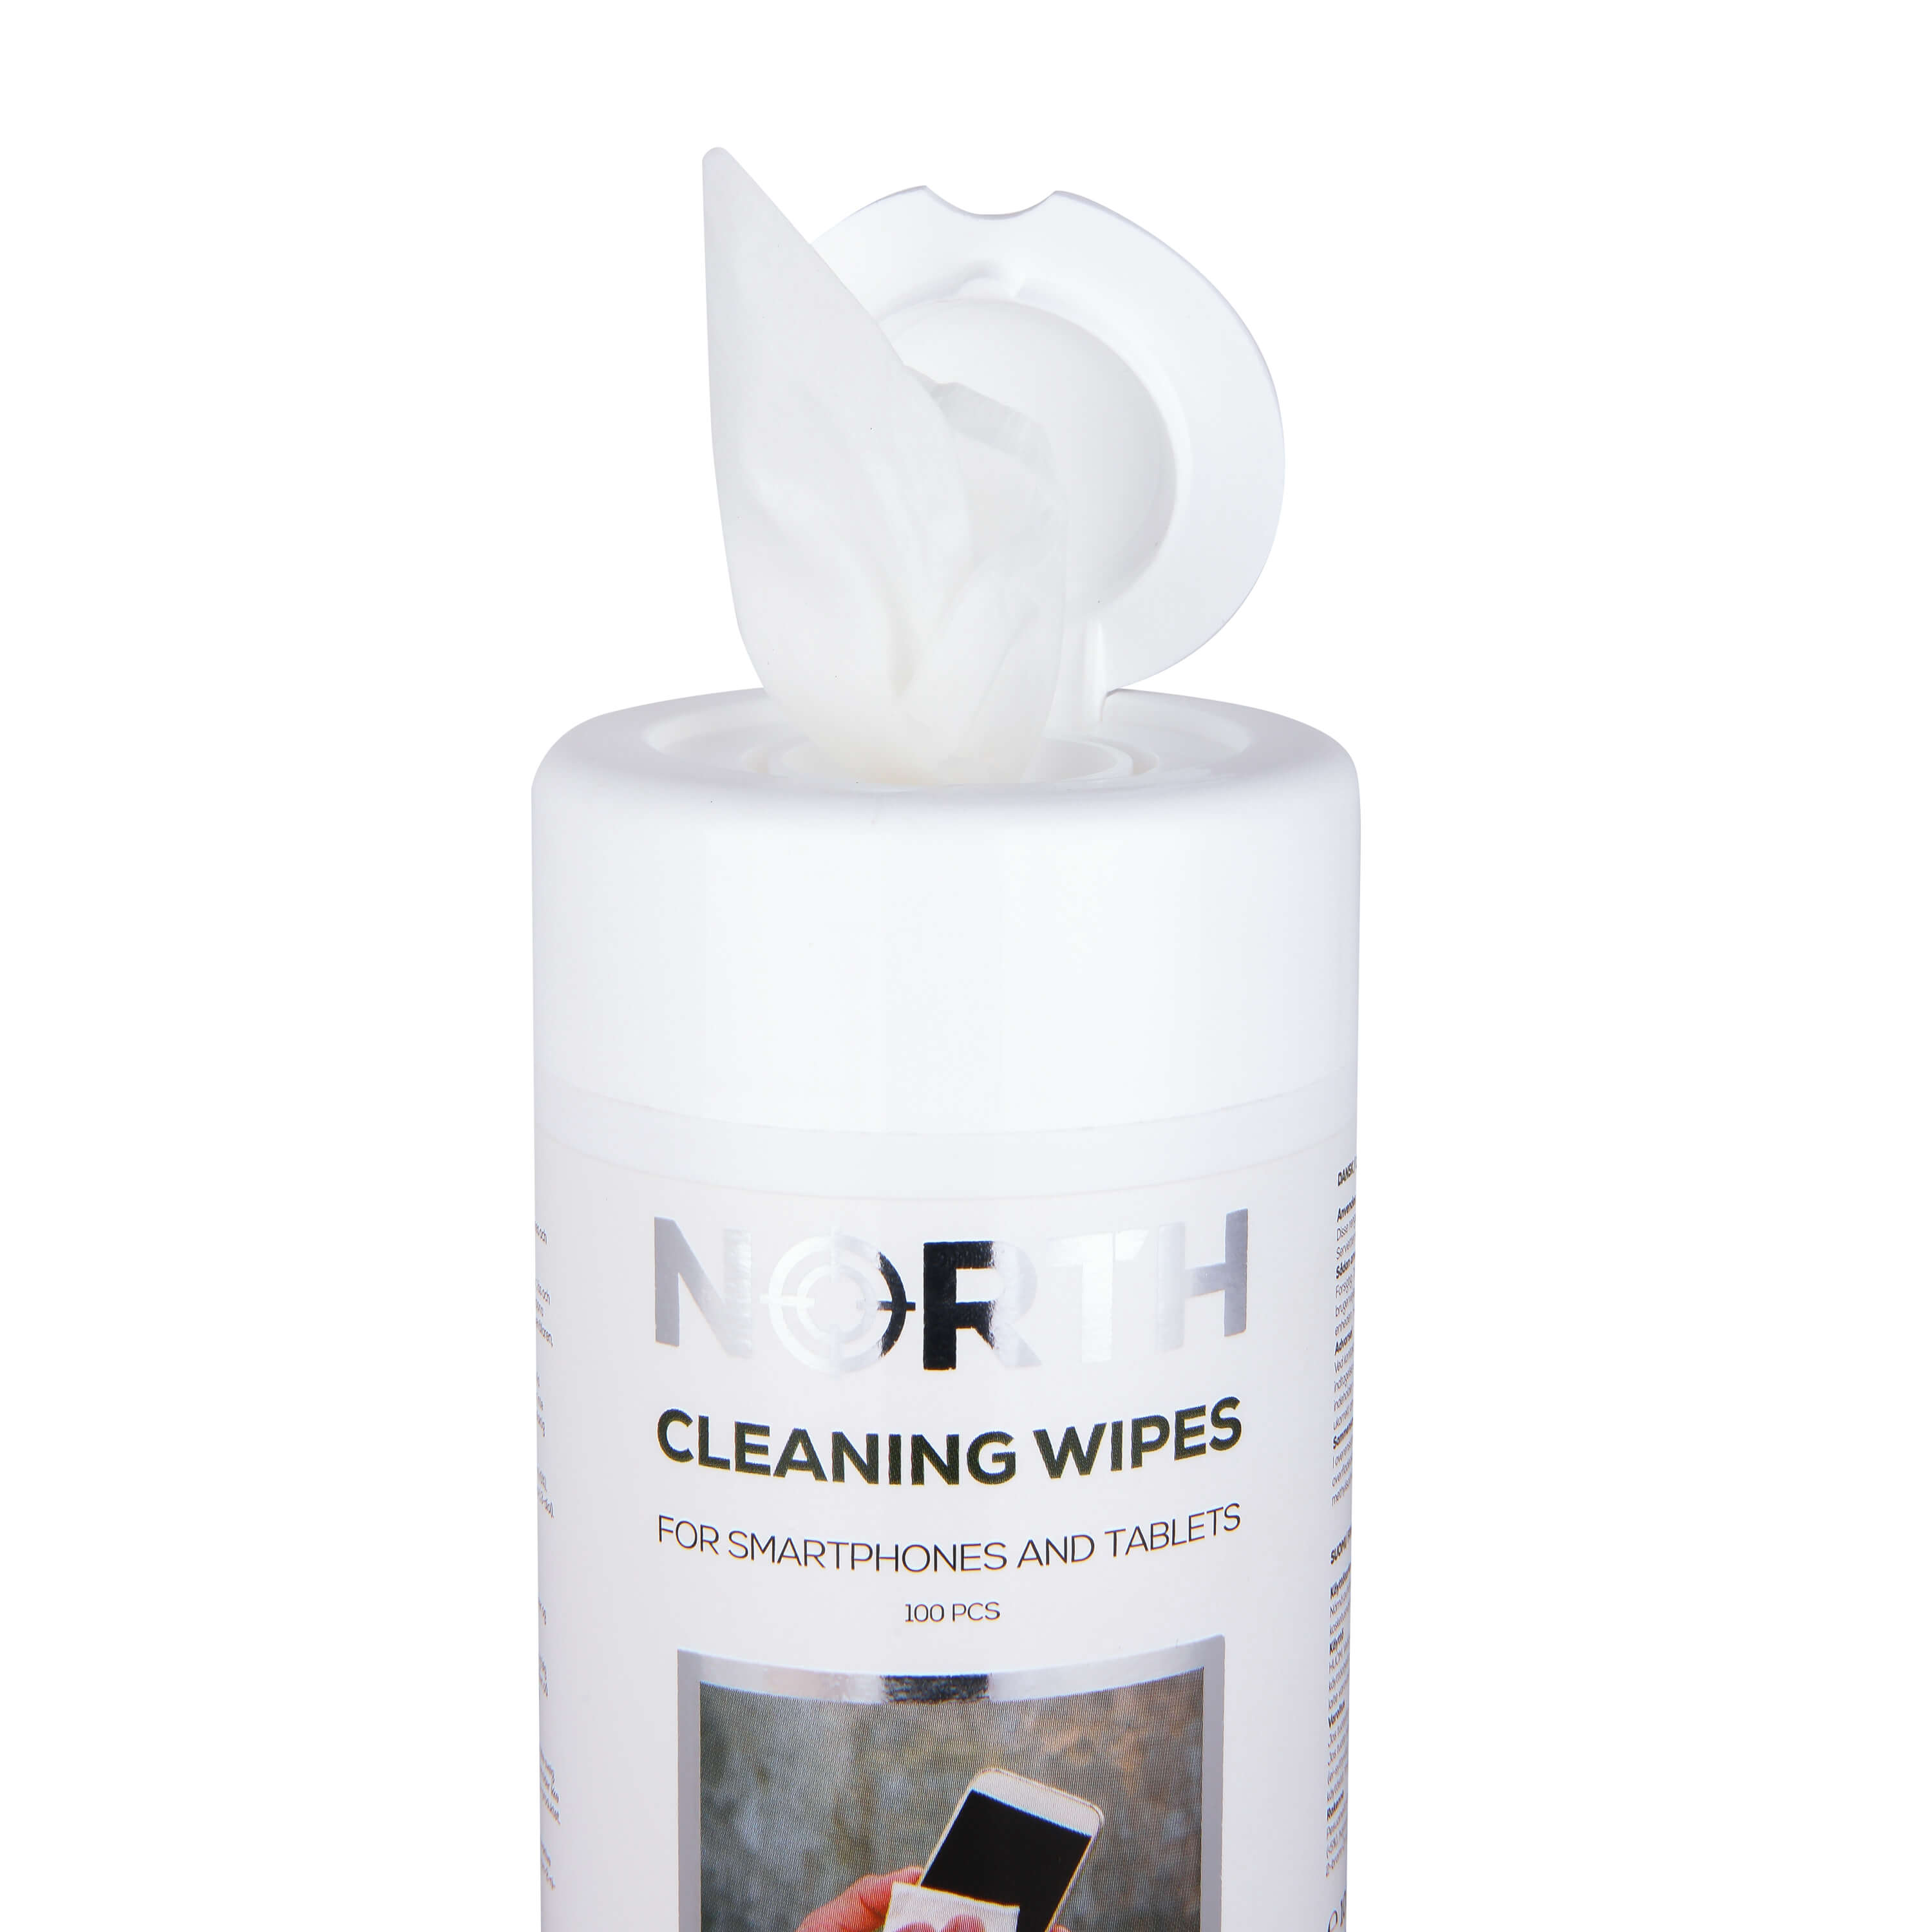 Cleaning Wipes - Phone and tablets